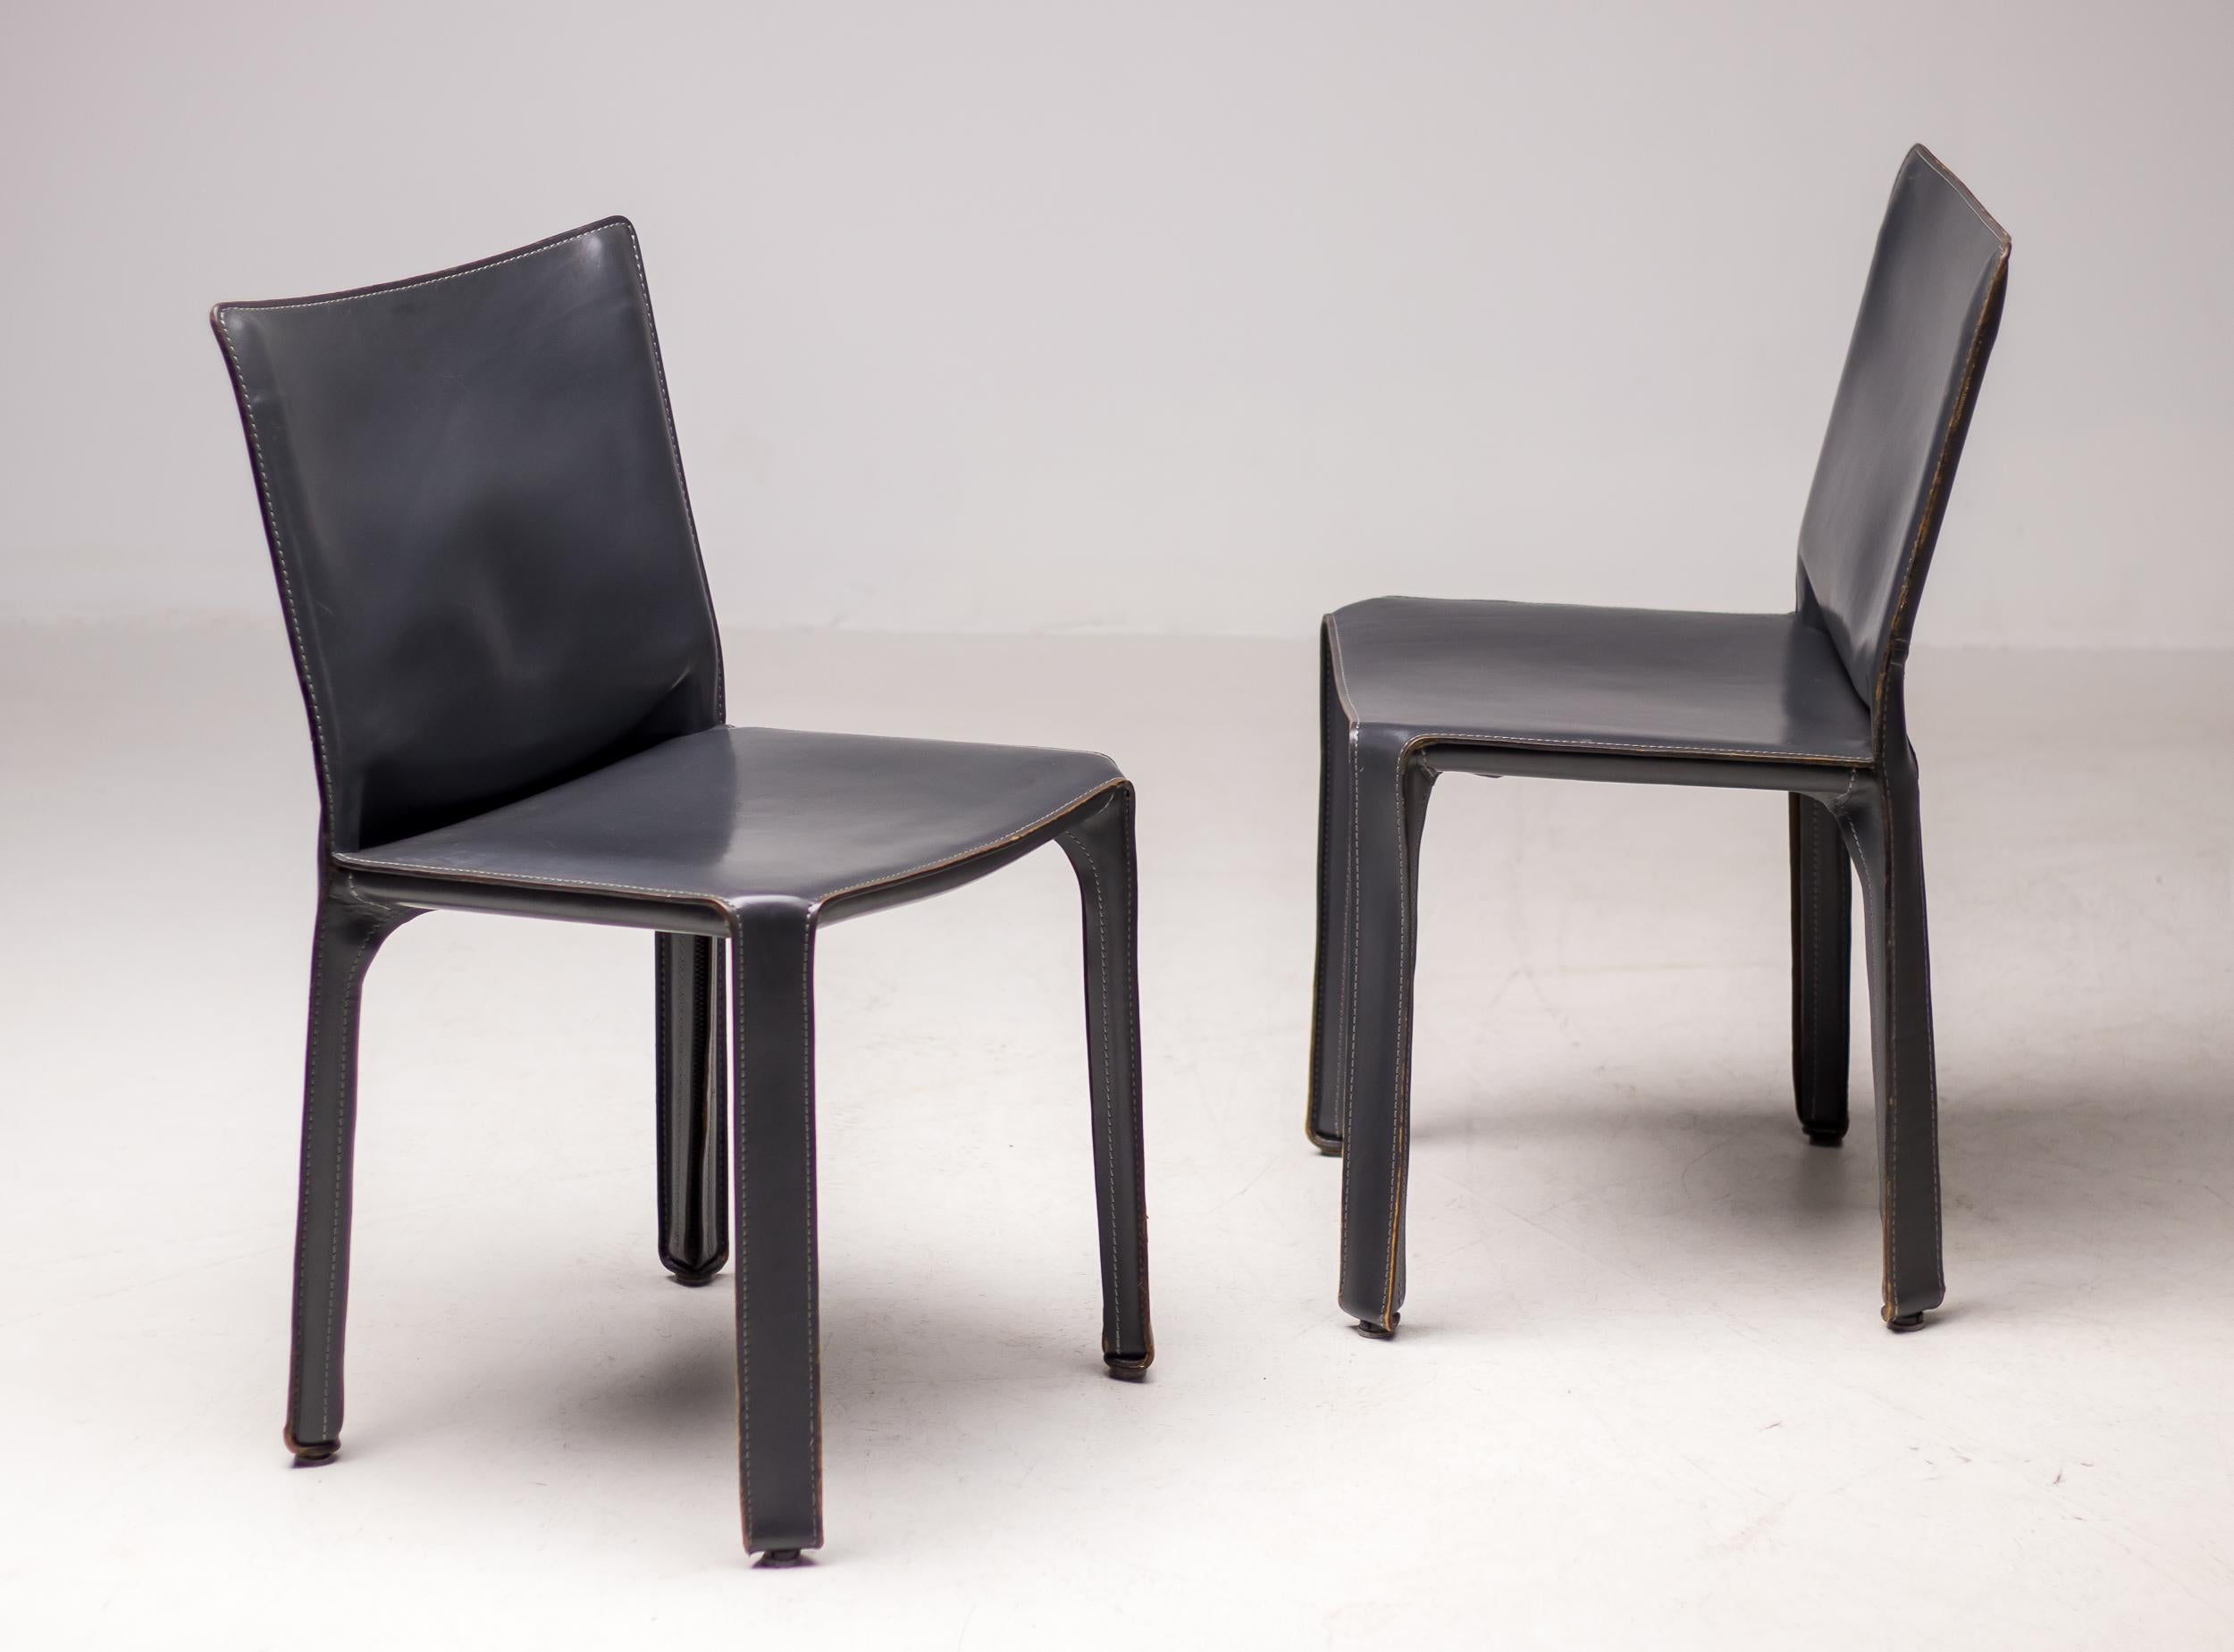 Side chairs model Cab, designed by Mario Bellini for Cassina.
Wonderful 1980 examples with buttery soft, newly reconditioned, elephant hide grey leather perfectly worn in from many years of use. Light patina, marked at the bottom.
Two available,